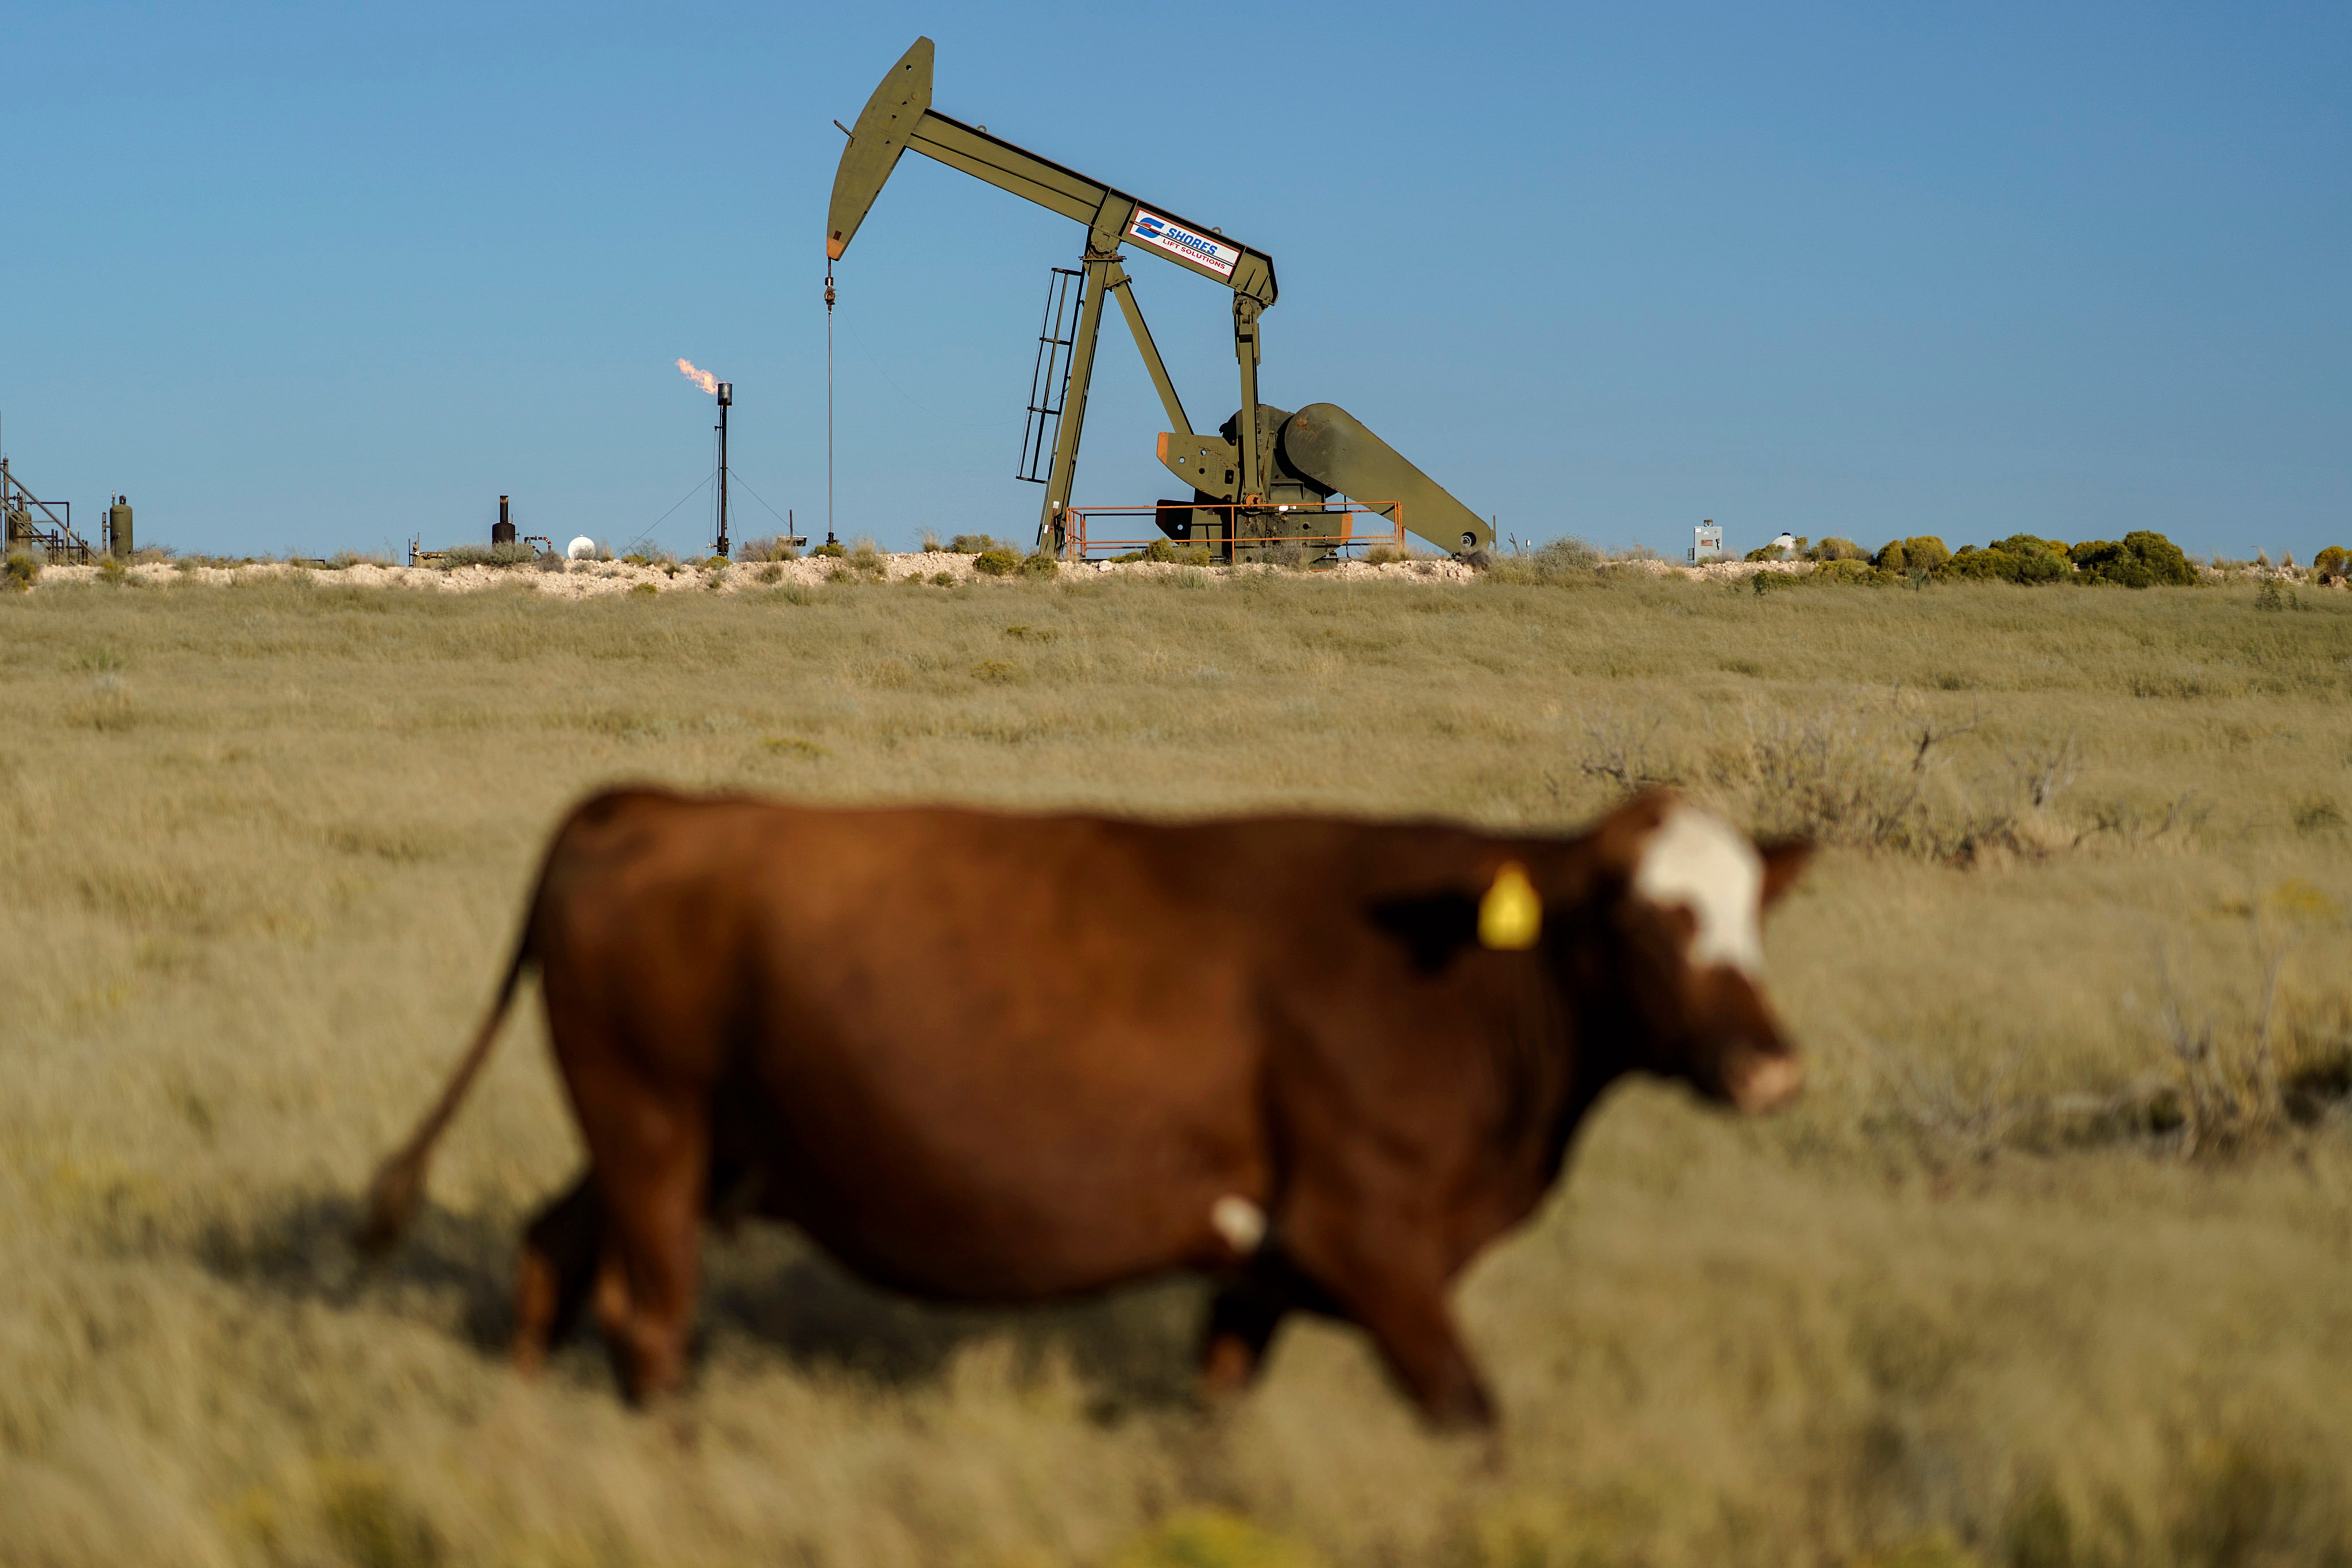 A cow walks through a field in front of an oil pumpjack and a flare burning off methane and other hydrocarbons in the US state of New Mexico. Photo: AP